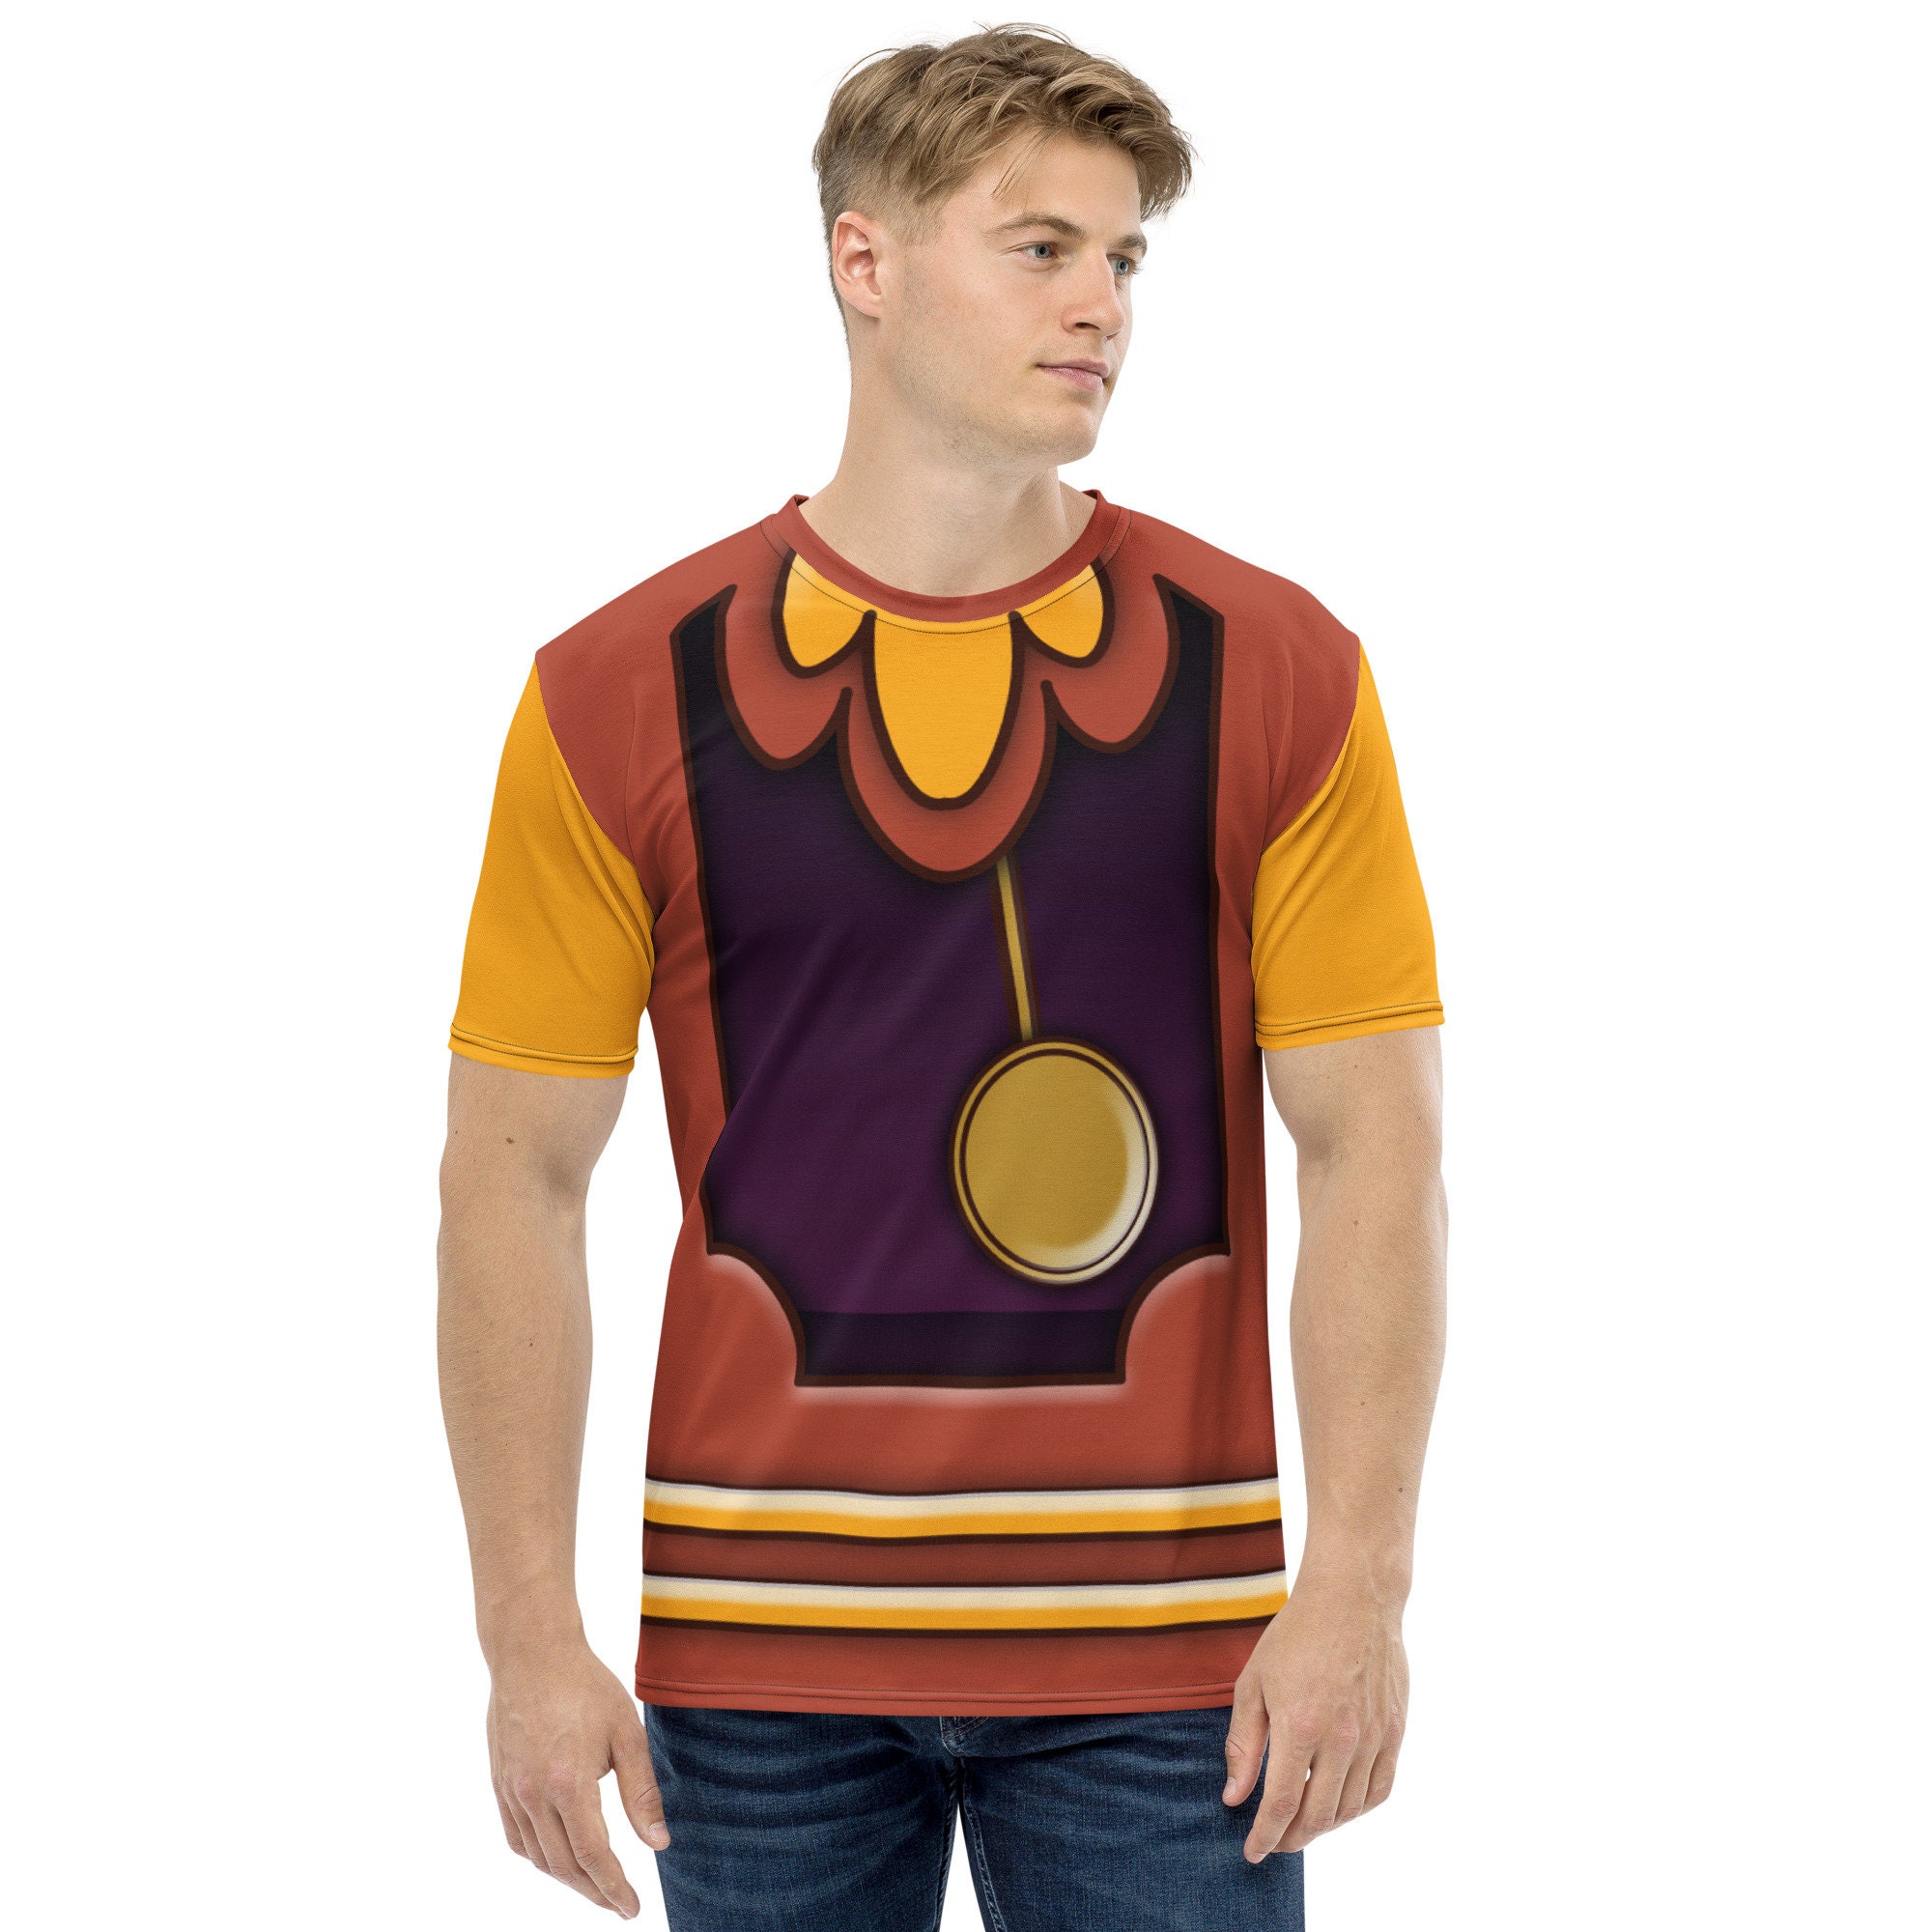 Cogsworth Inspired T-Shirt - Beauty and the Beast Disney 3D Shirt